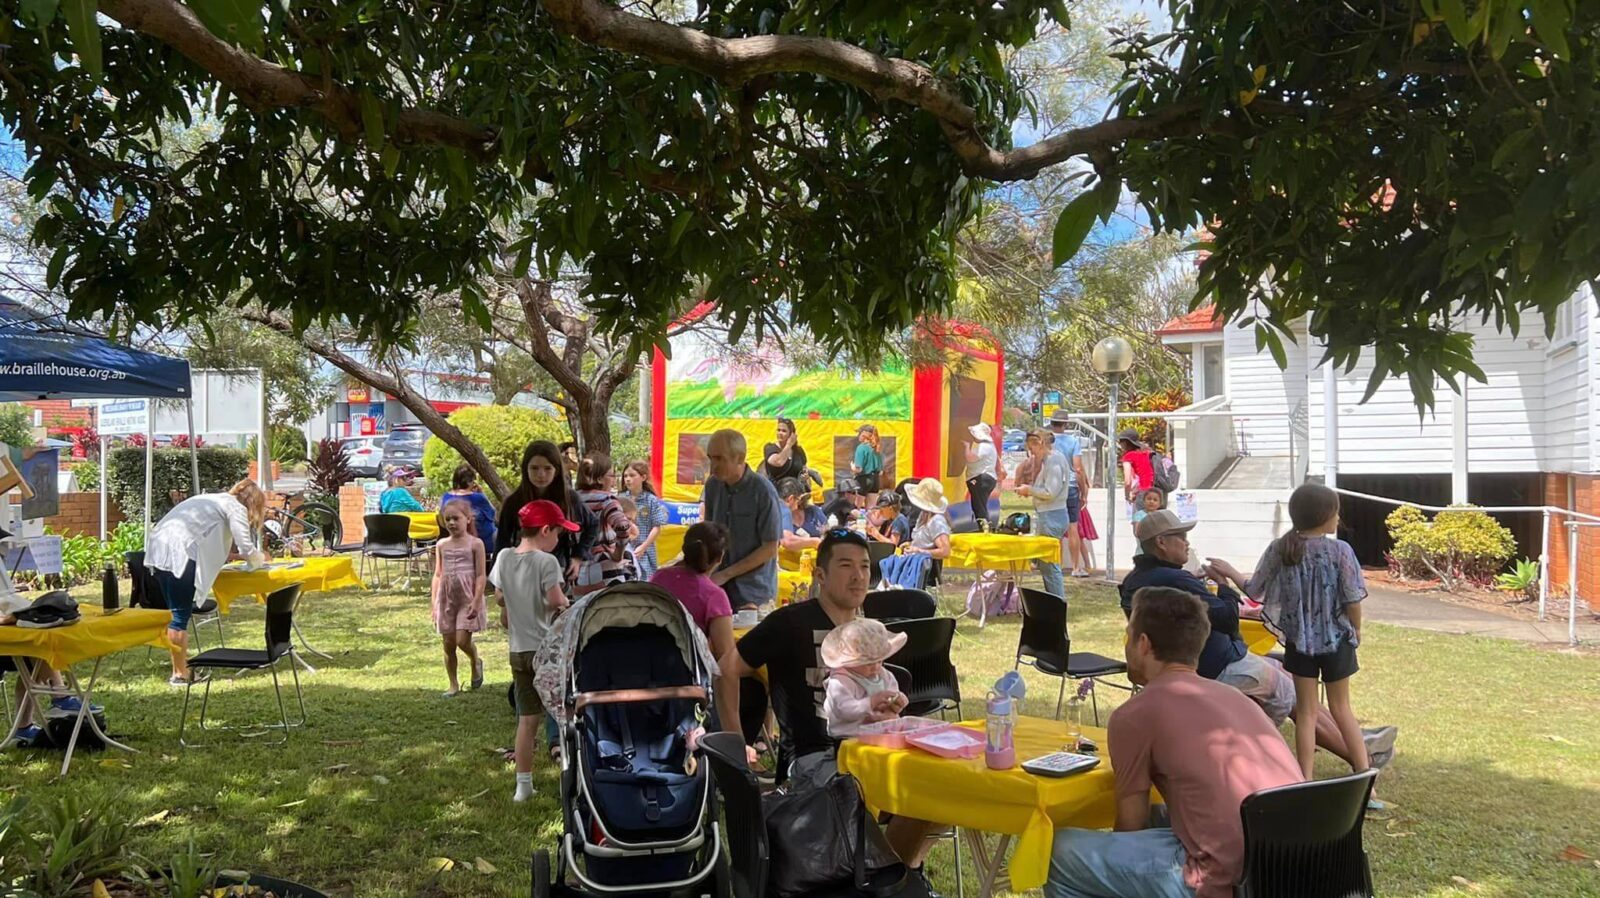 people sitting in the outdoors under a tree with a jumping castle in the background.